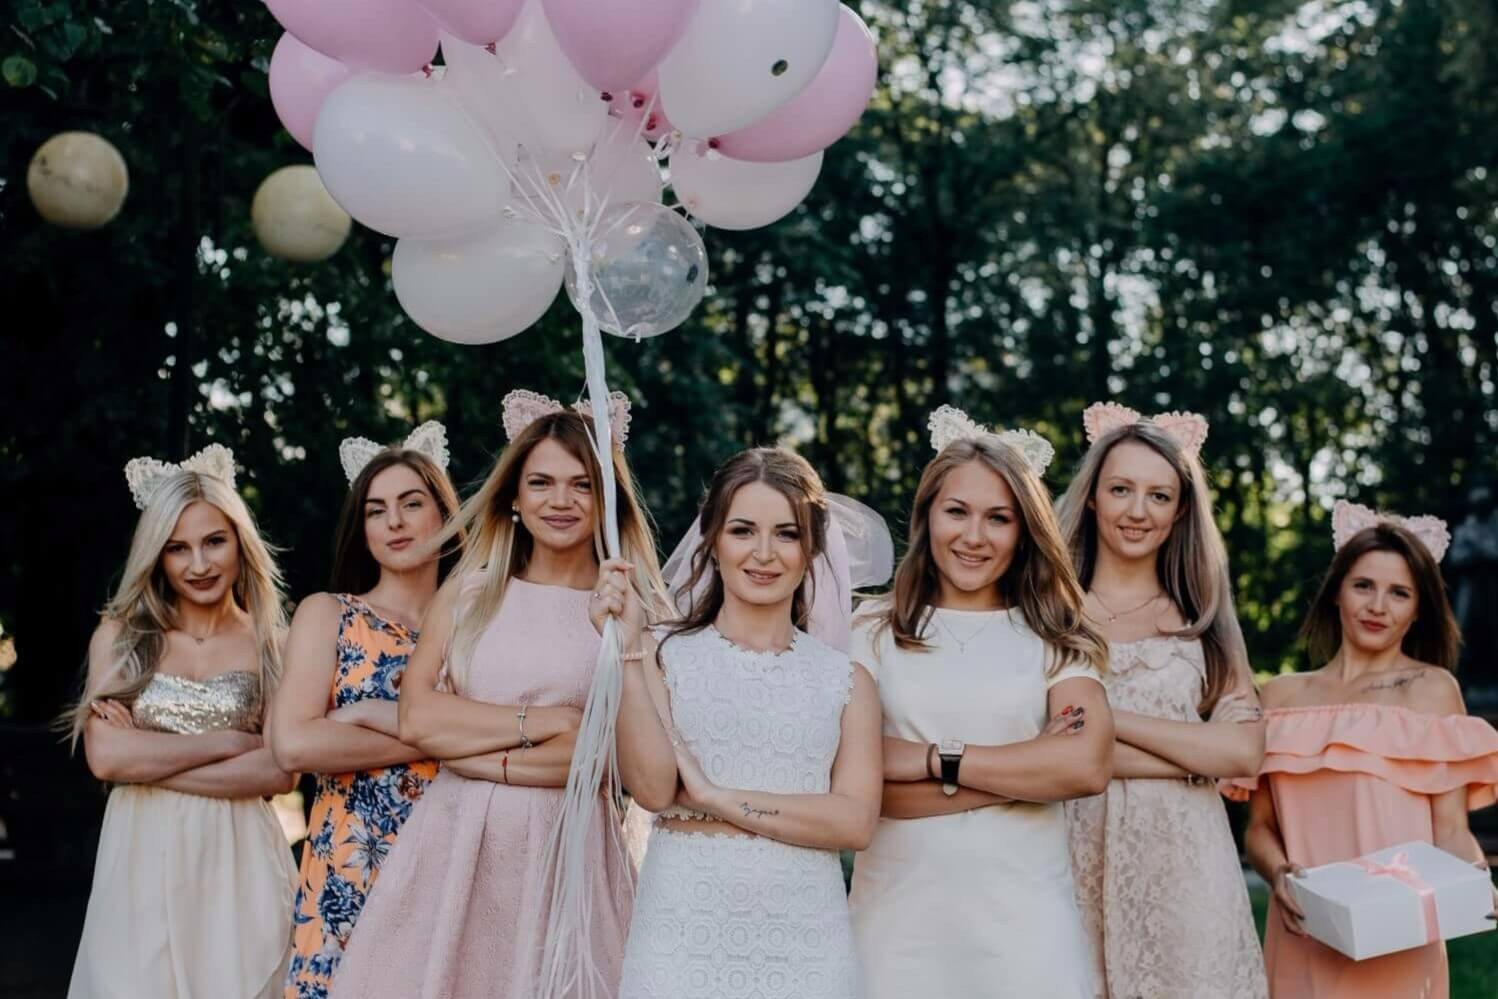 Bridesmaid Ideas For Bachelorette Party
 The Unwritten Rules of the Bachelorette Party